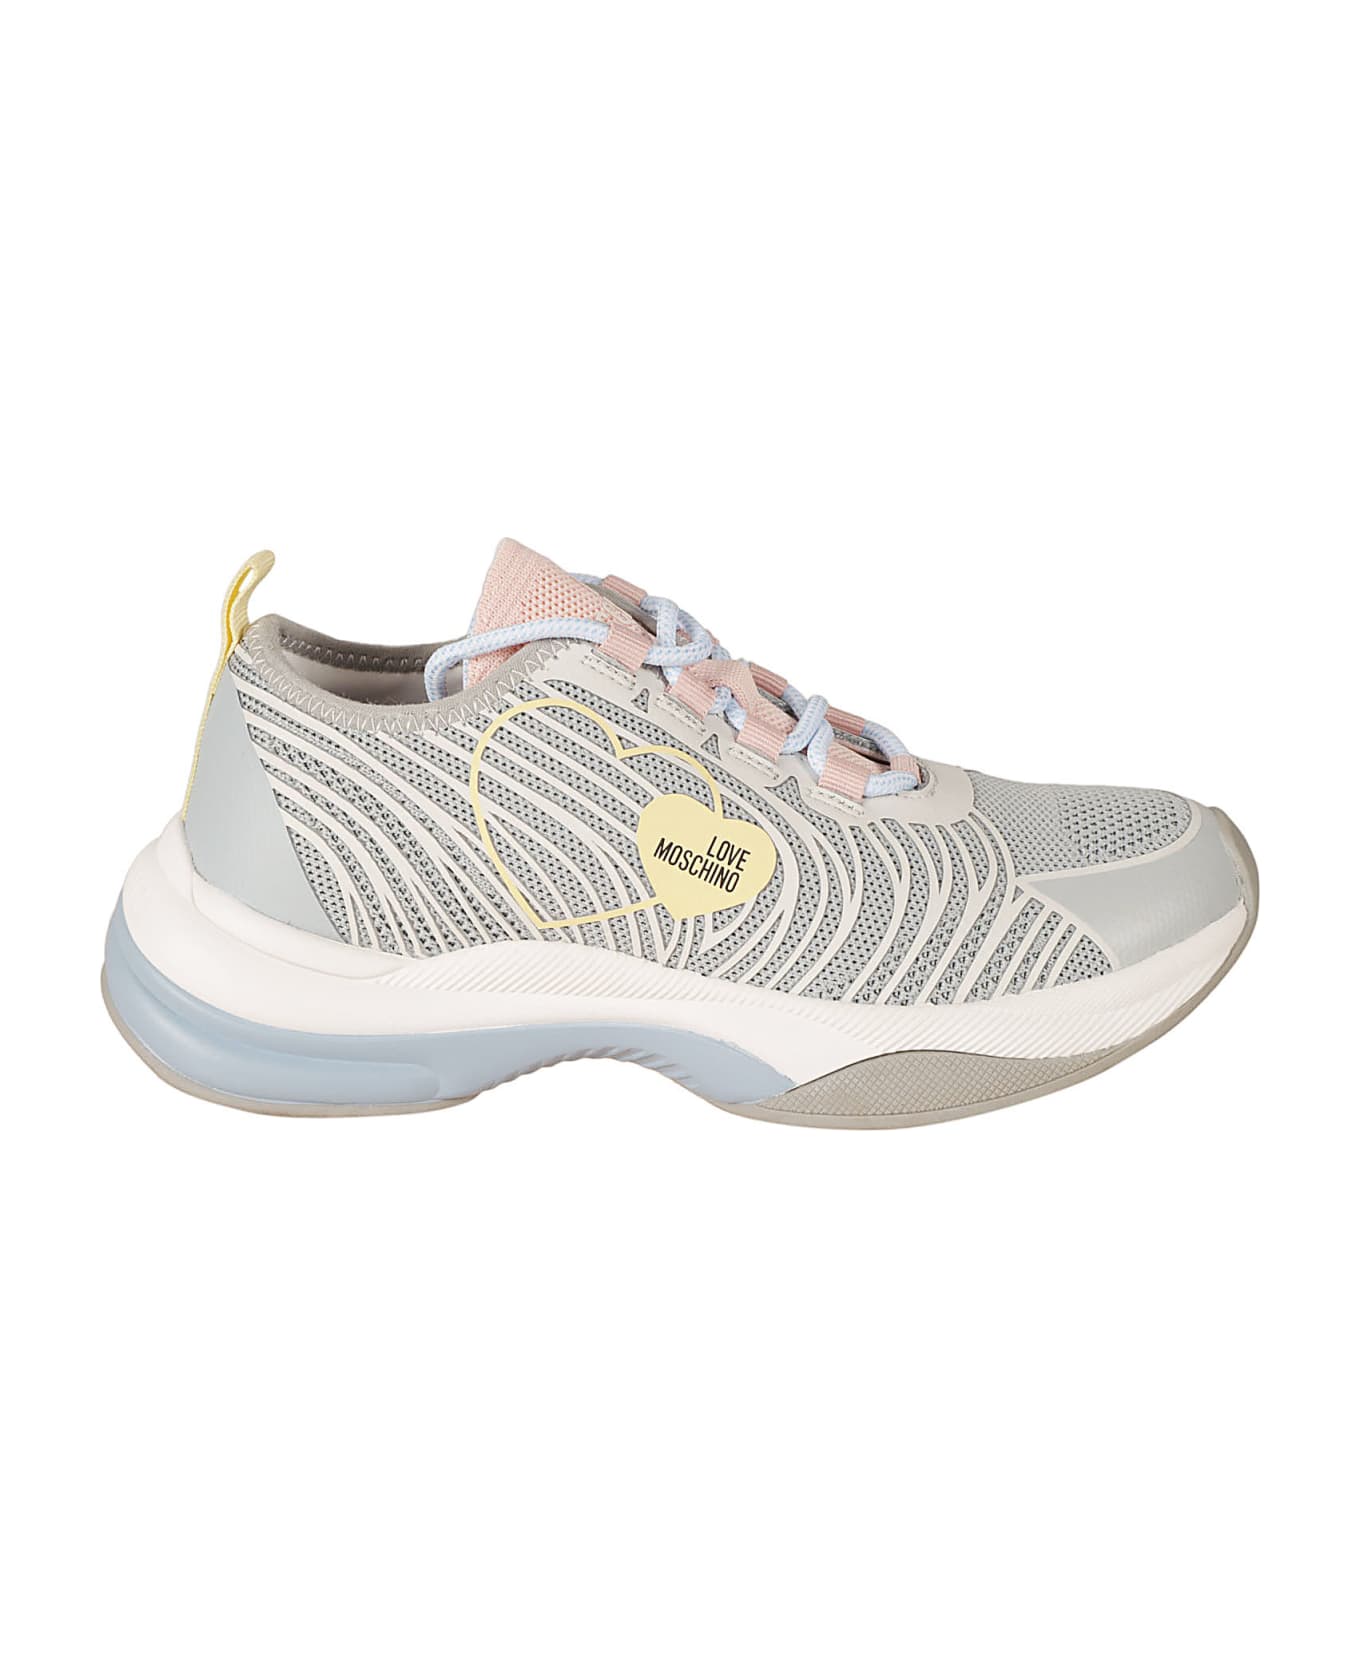 Love Moschino Sprint 50 Sneakers - Grey